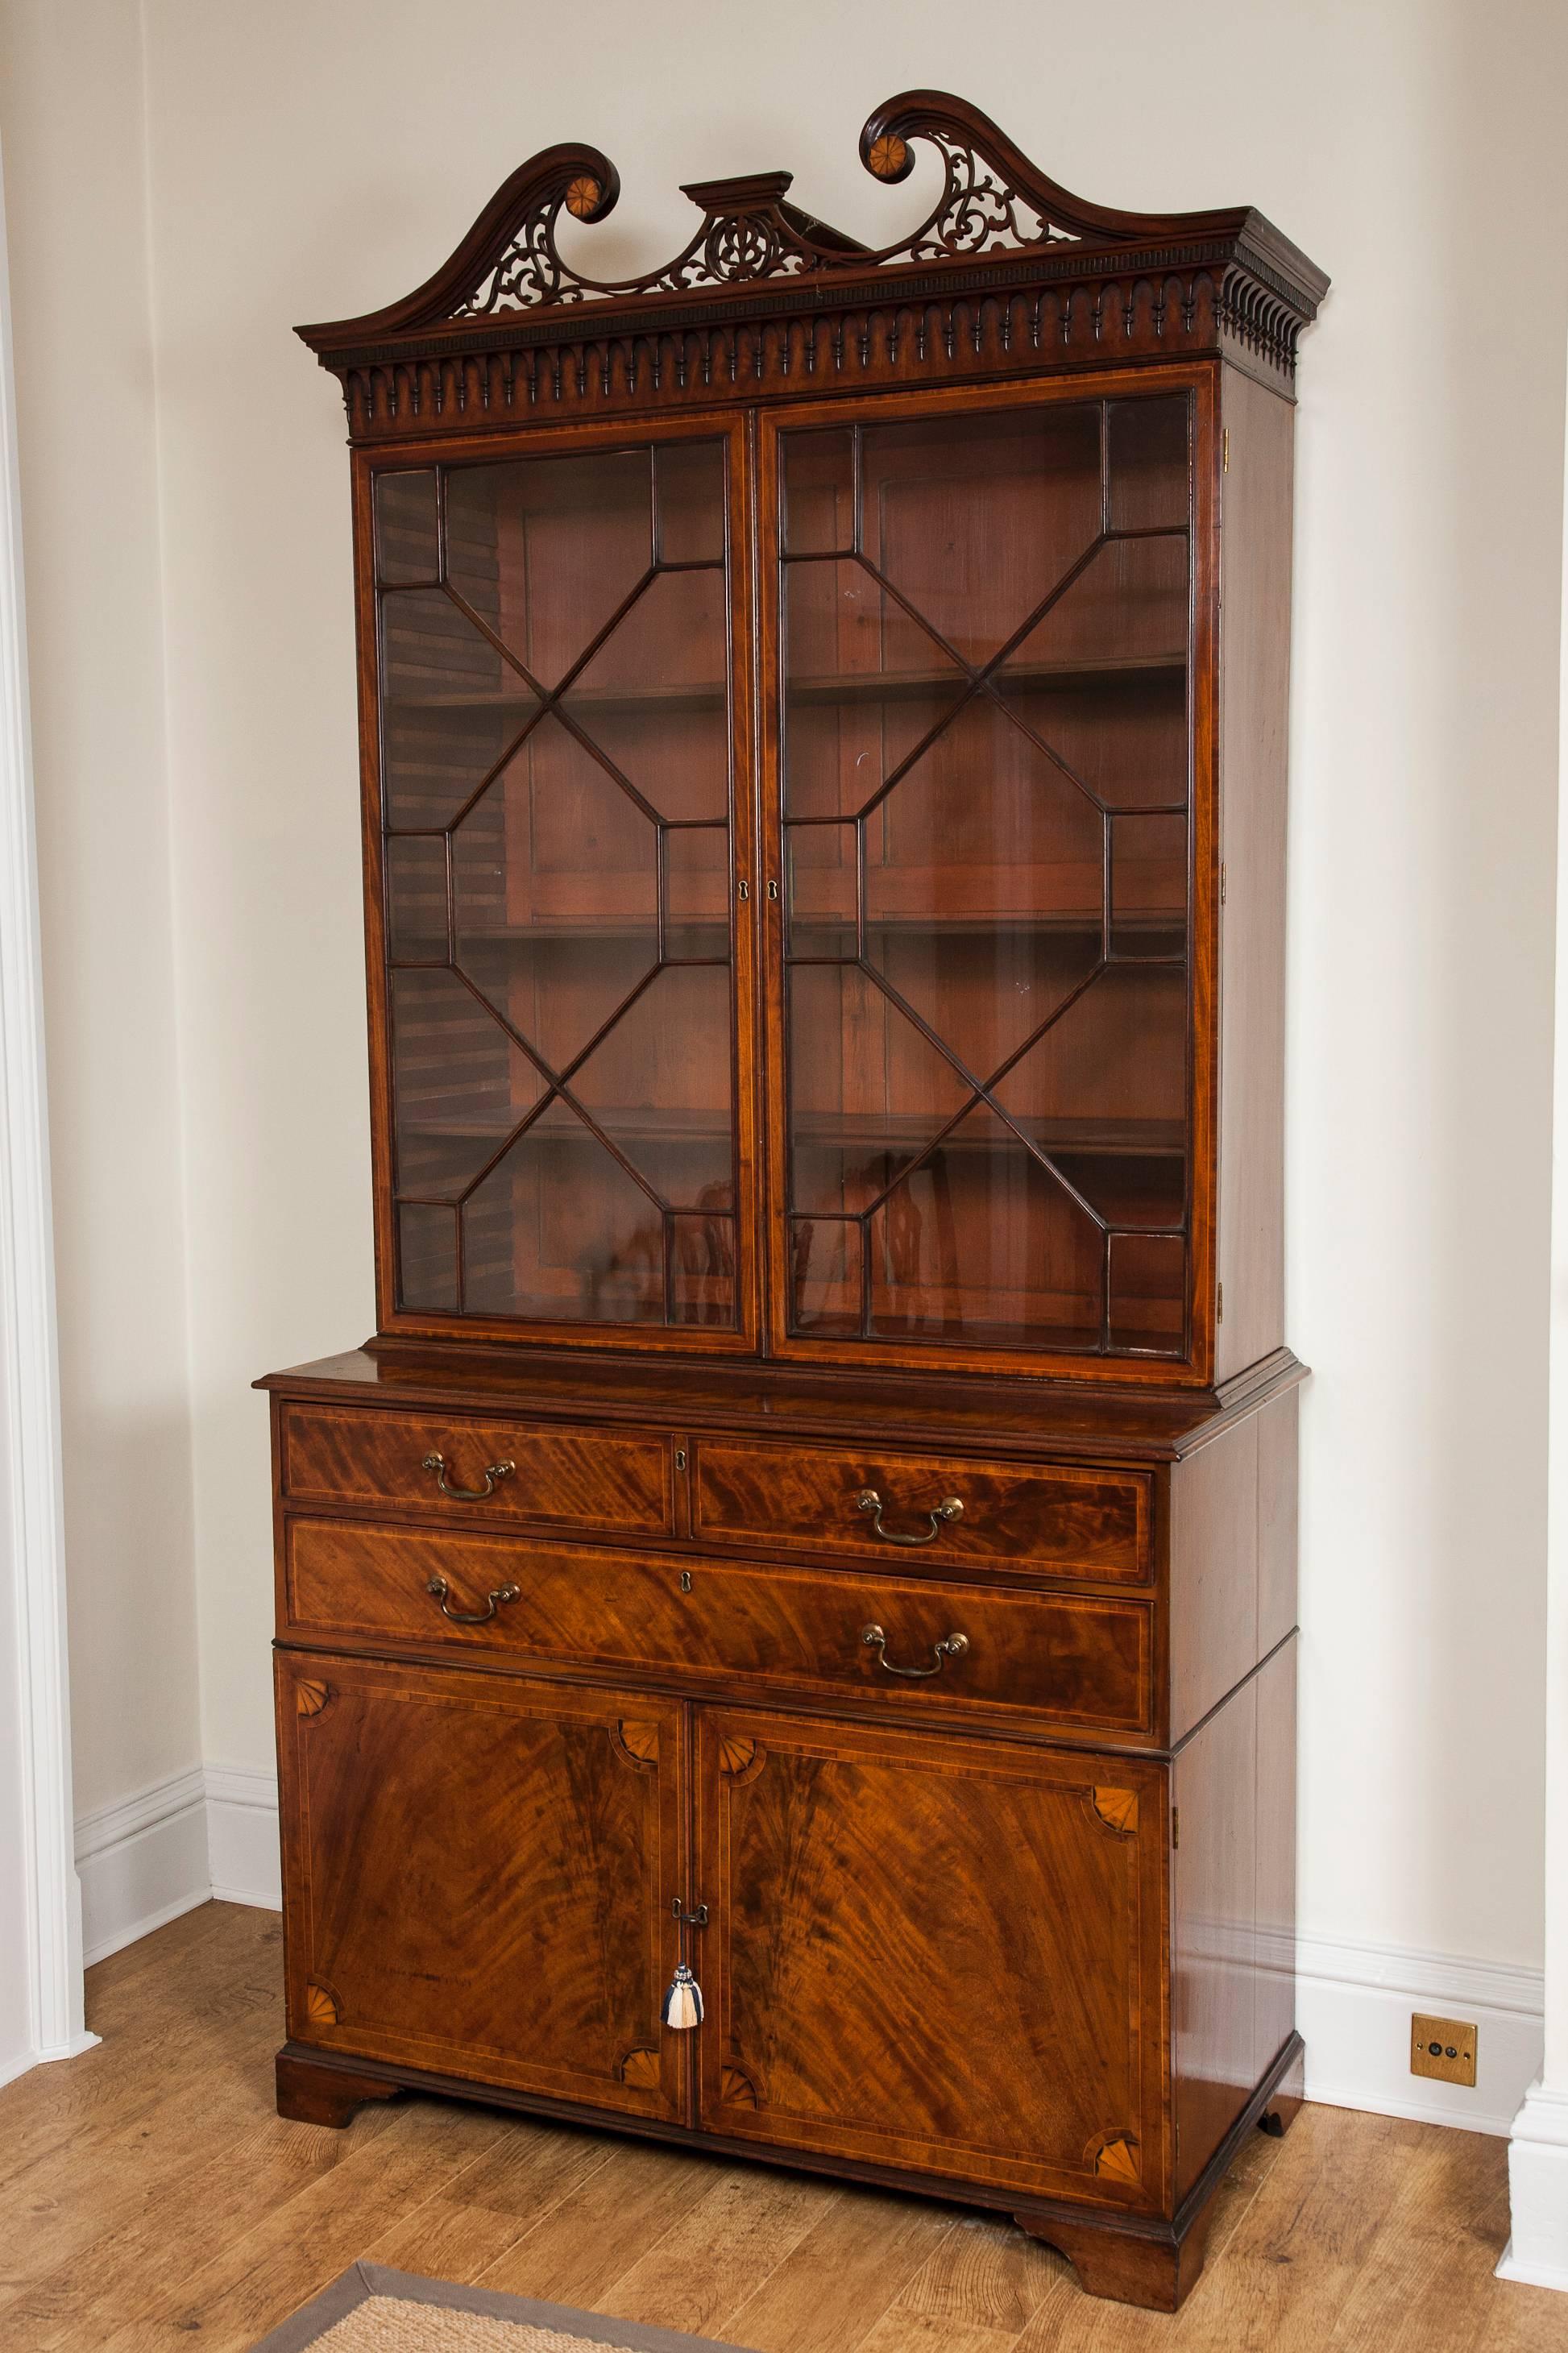 A superb late 18th century mahogany glazed door bookcase, the upper section with pierced mahogany swan neck pediment with inset satinwood patterae over dentil and arched and finial cornice, above two glazed doors and adjustable shelves. The lower